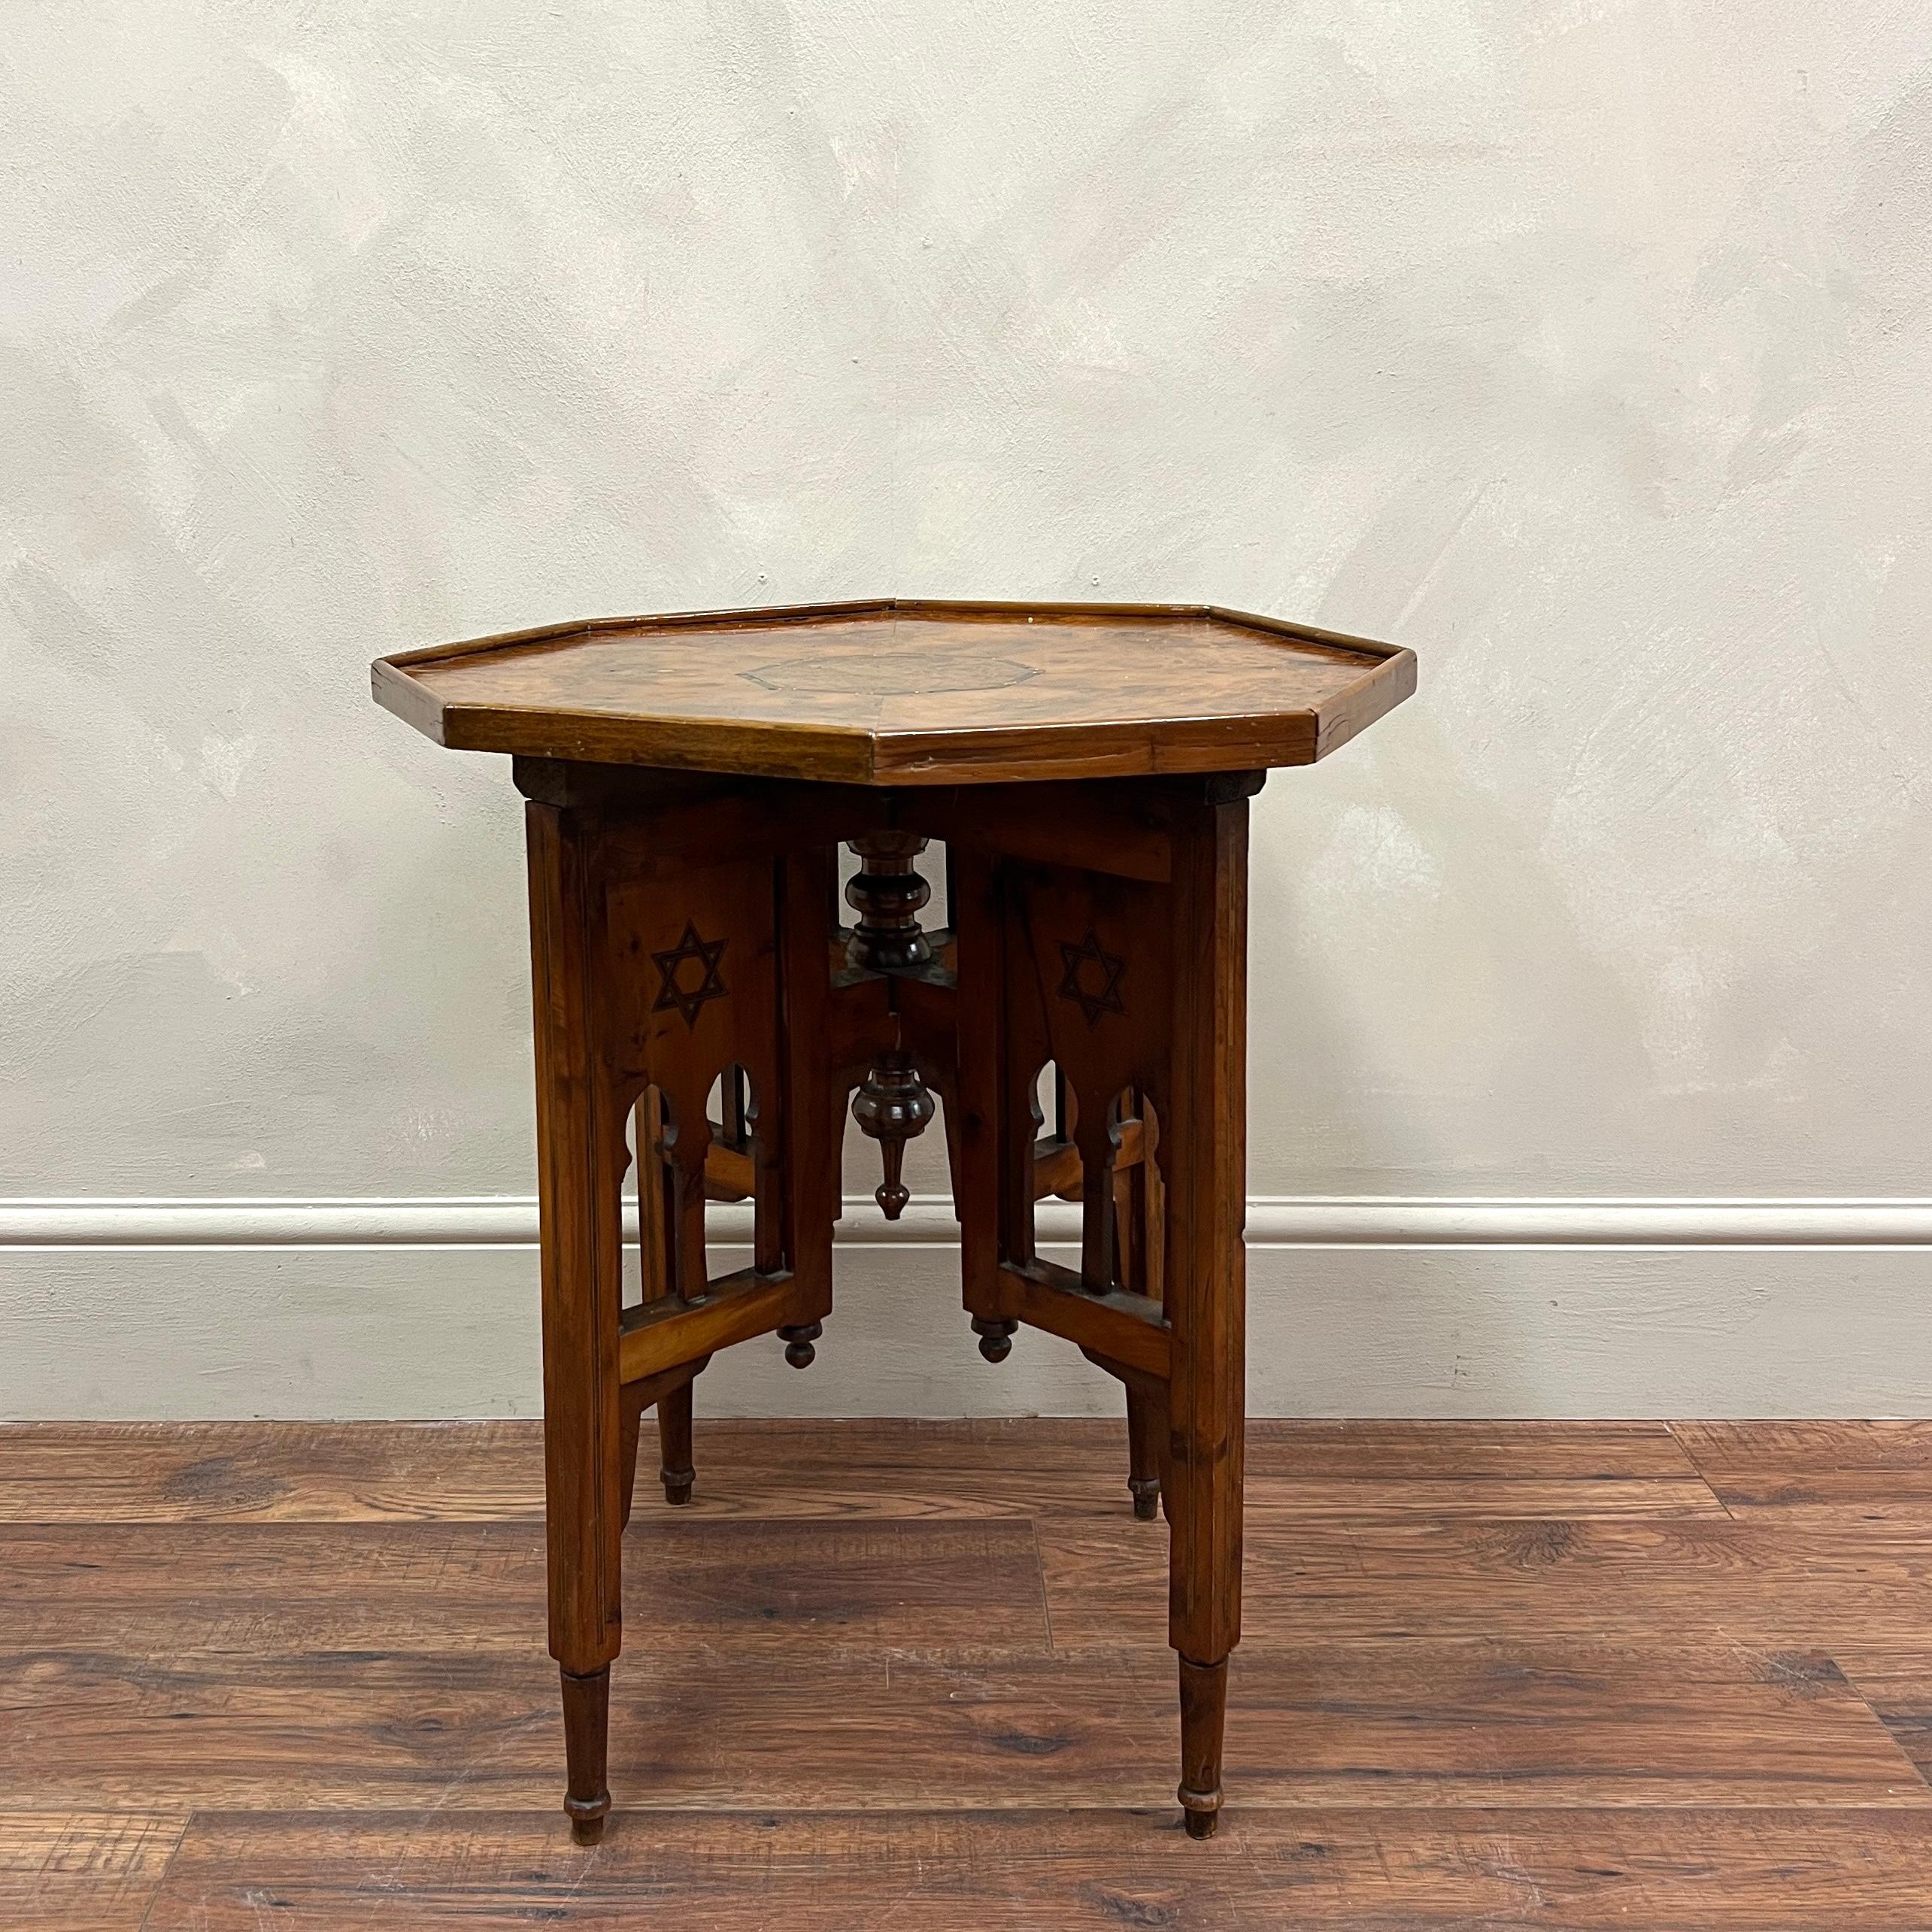 A hexagonal side table with inlay detail, made from burr walnut veneer. sitting on 4 legs with a detailed carved design and a central finial.
No losses but has aged very well.

Morocco, circa 1920.

Height -62.5cm
Diameter -54.25We are happy to work